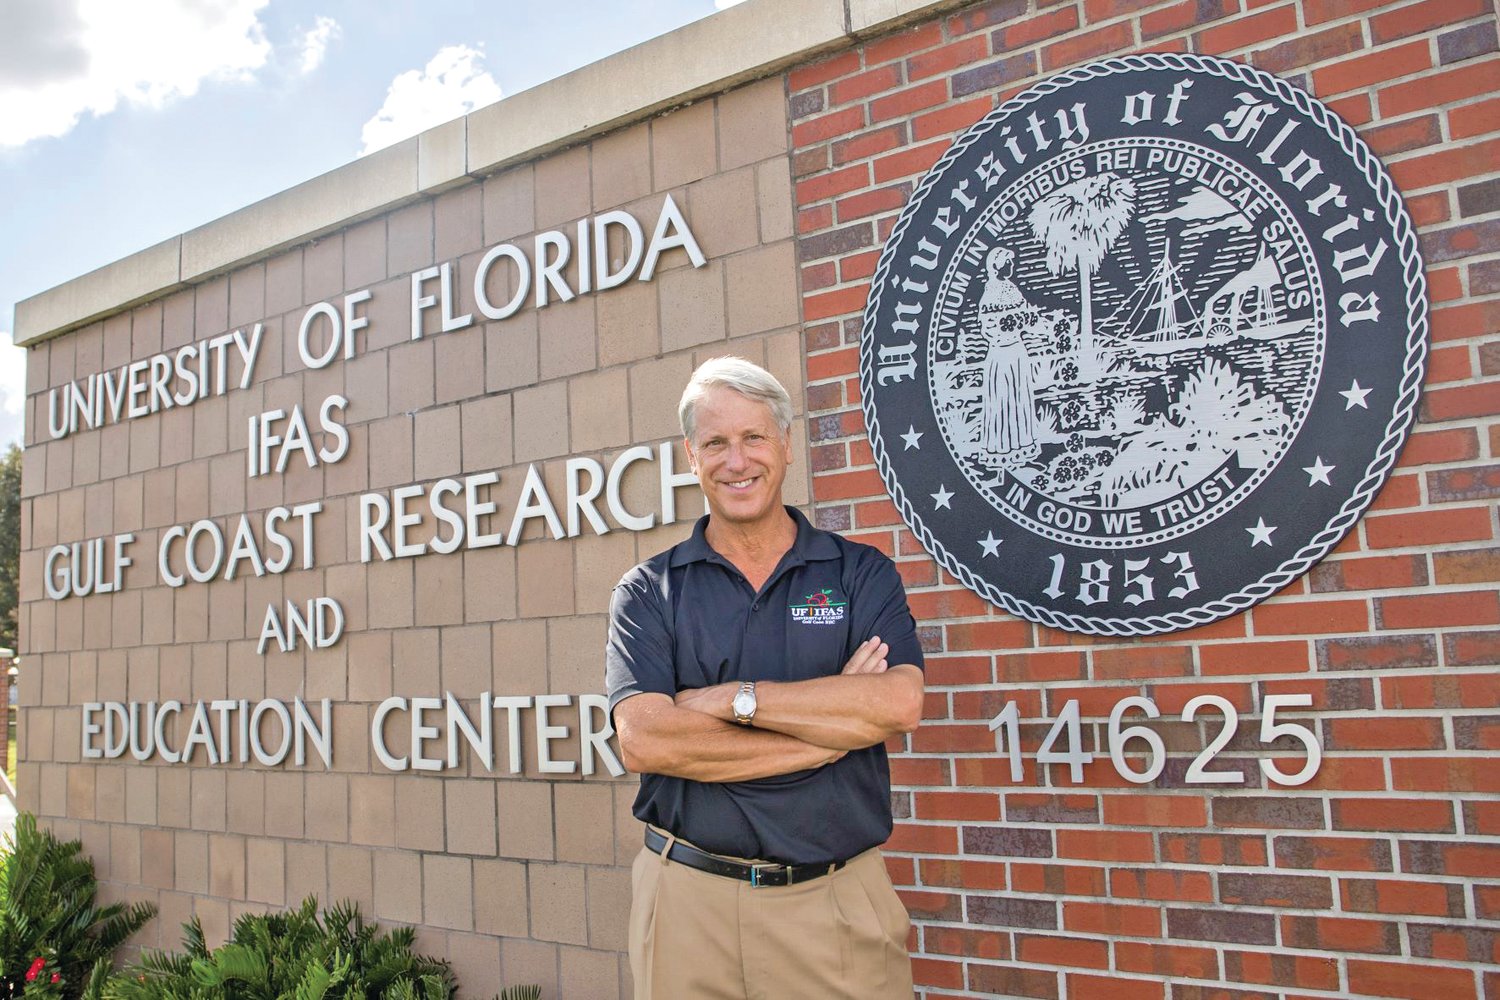 Jack Rechcigl – director of the Gulf Coast Research and Education Center.